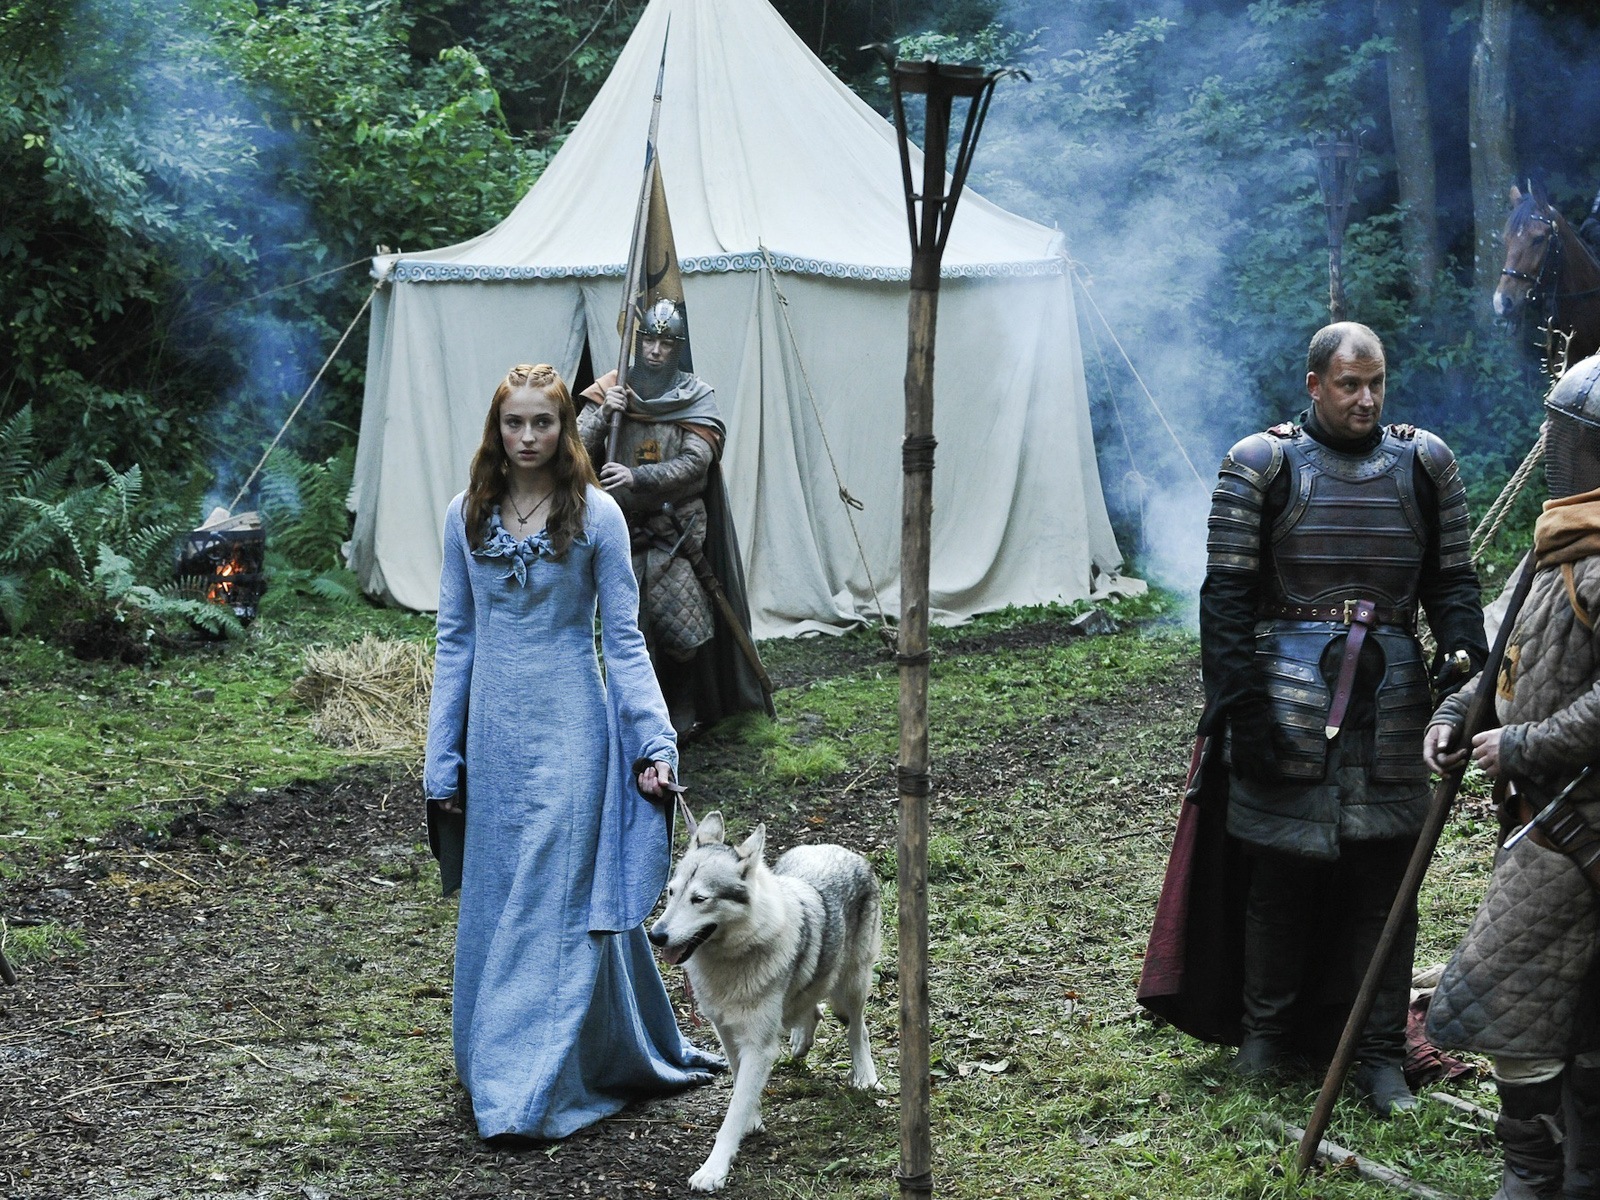 A Song of Ice and Fire: Game of Thrones 冰與火之歌：權力的遊戲高清壁紙 #46 - 1600x1200